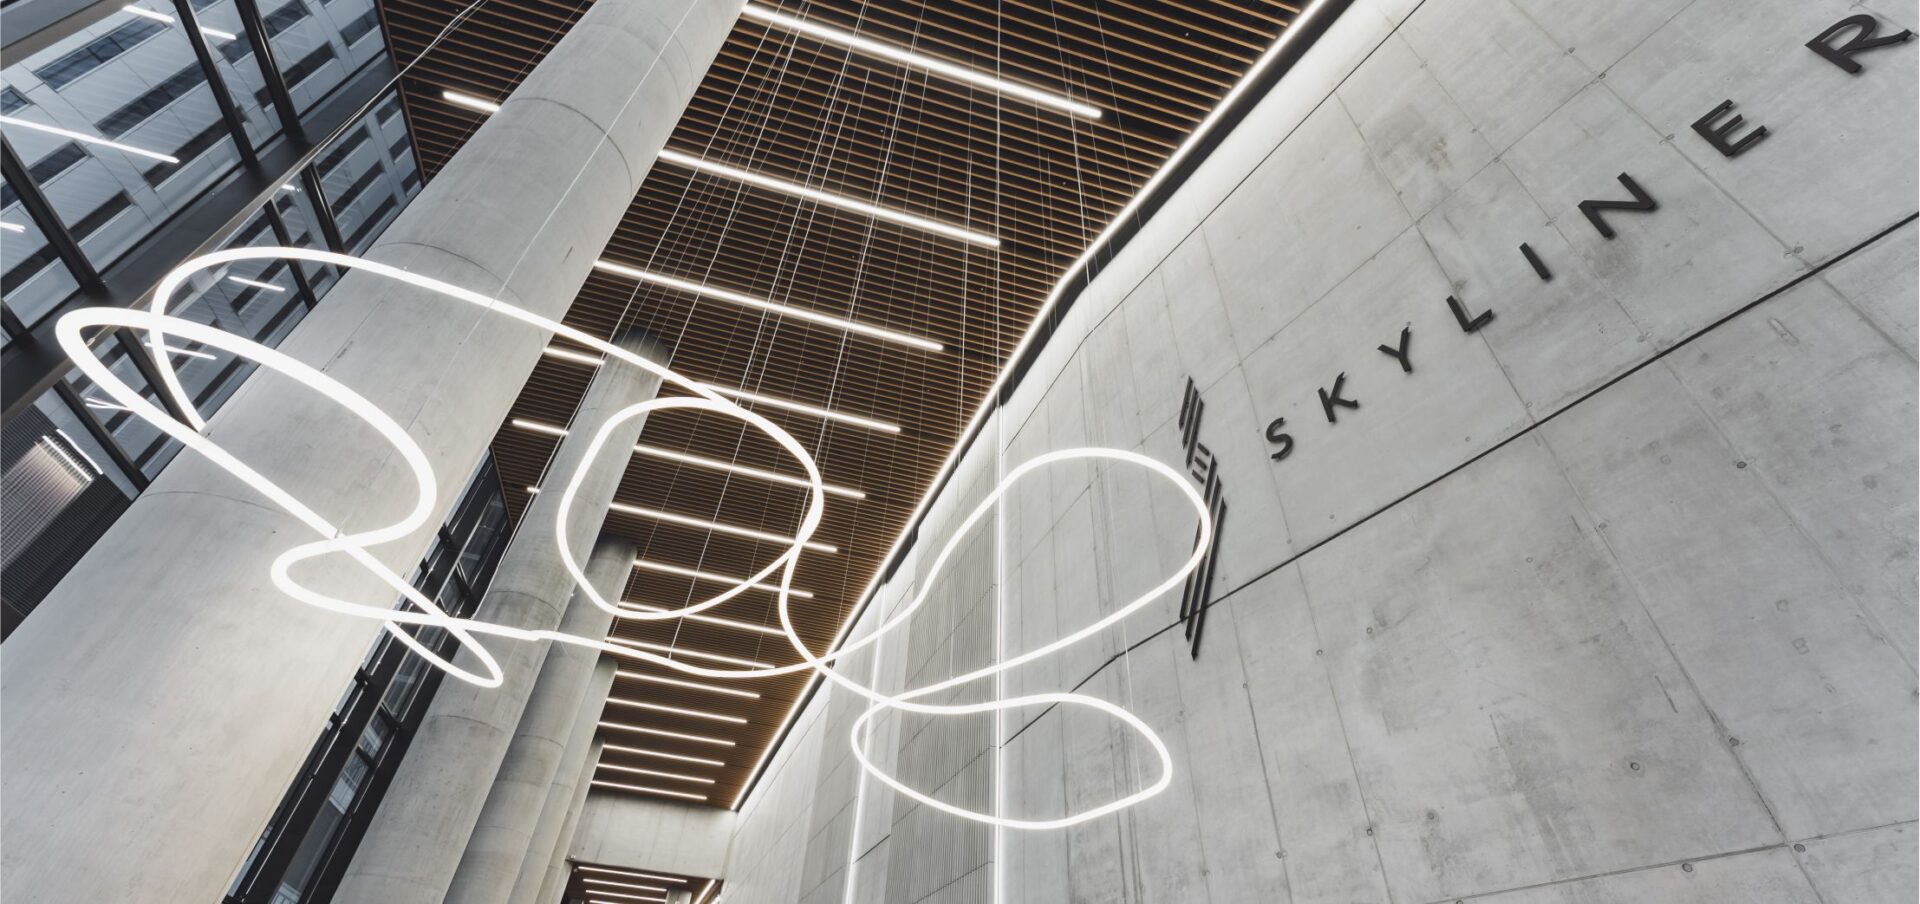 Realization of 3D light structure in the lobby of Skyliner building in Warsaw.